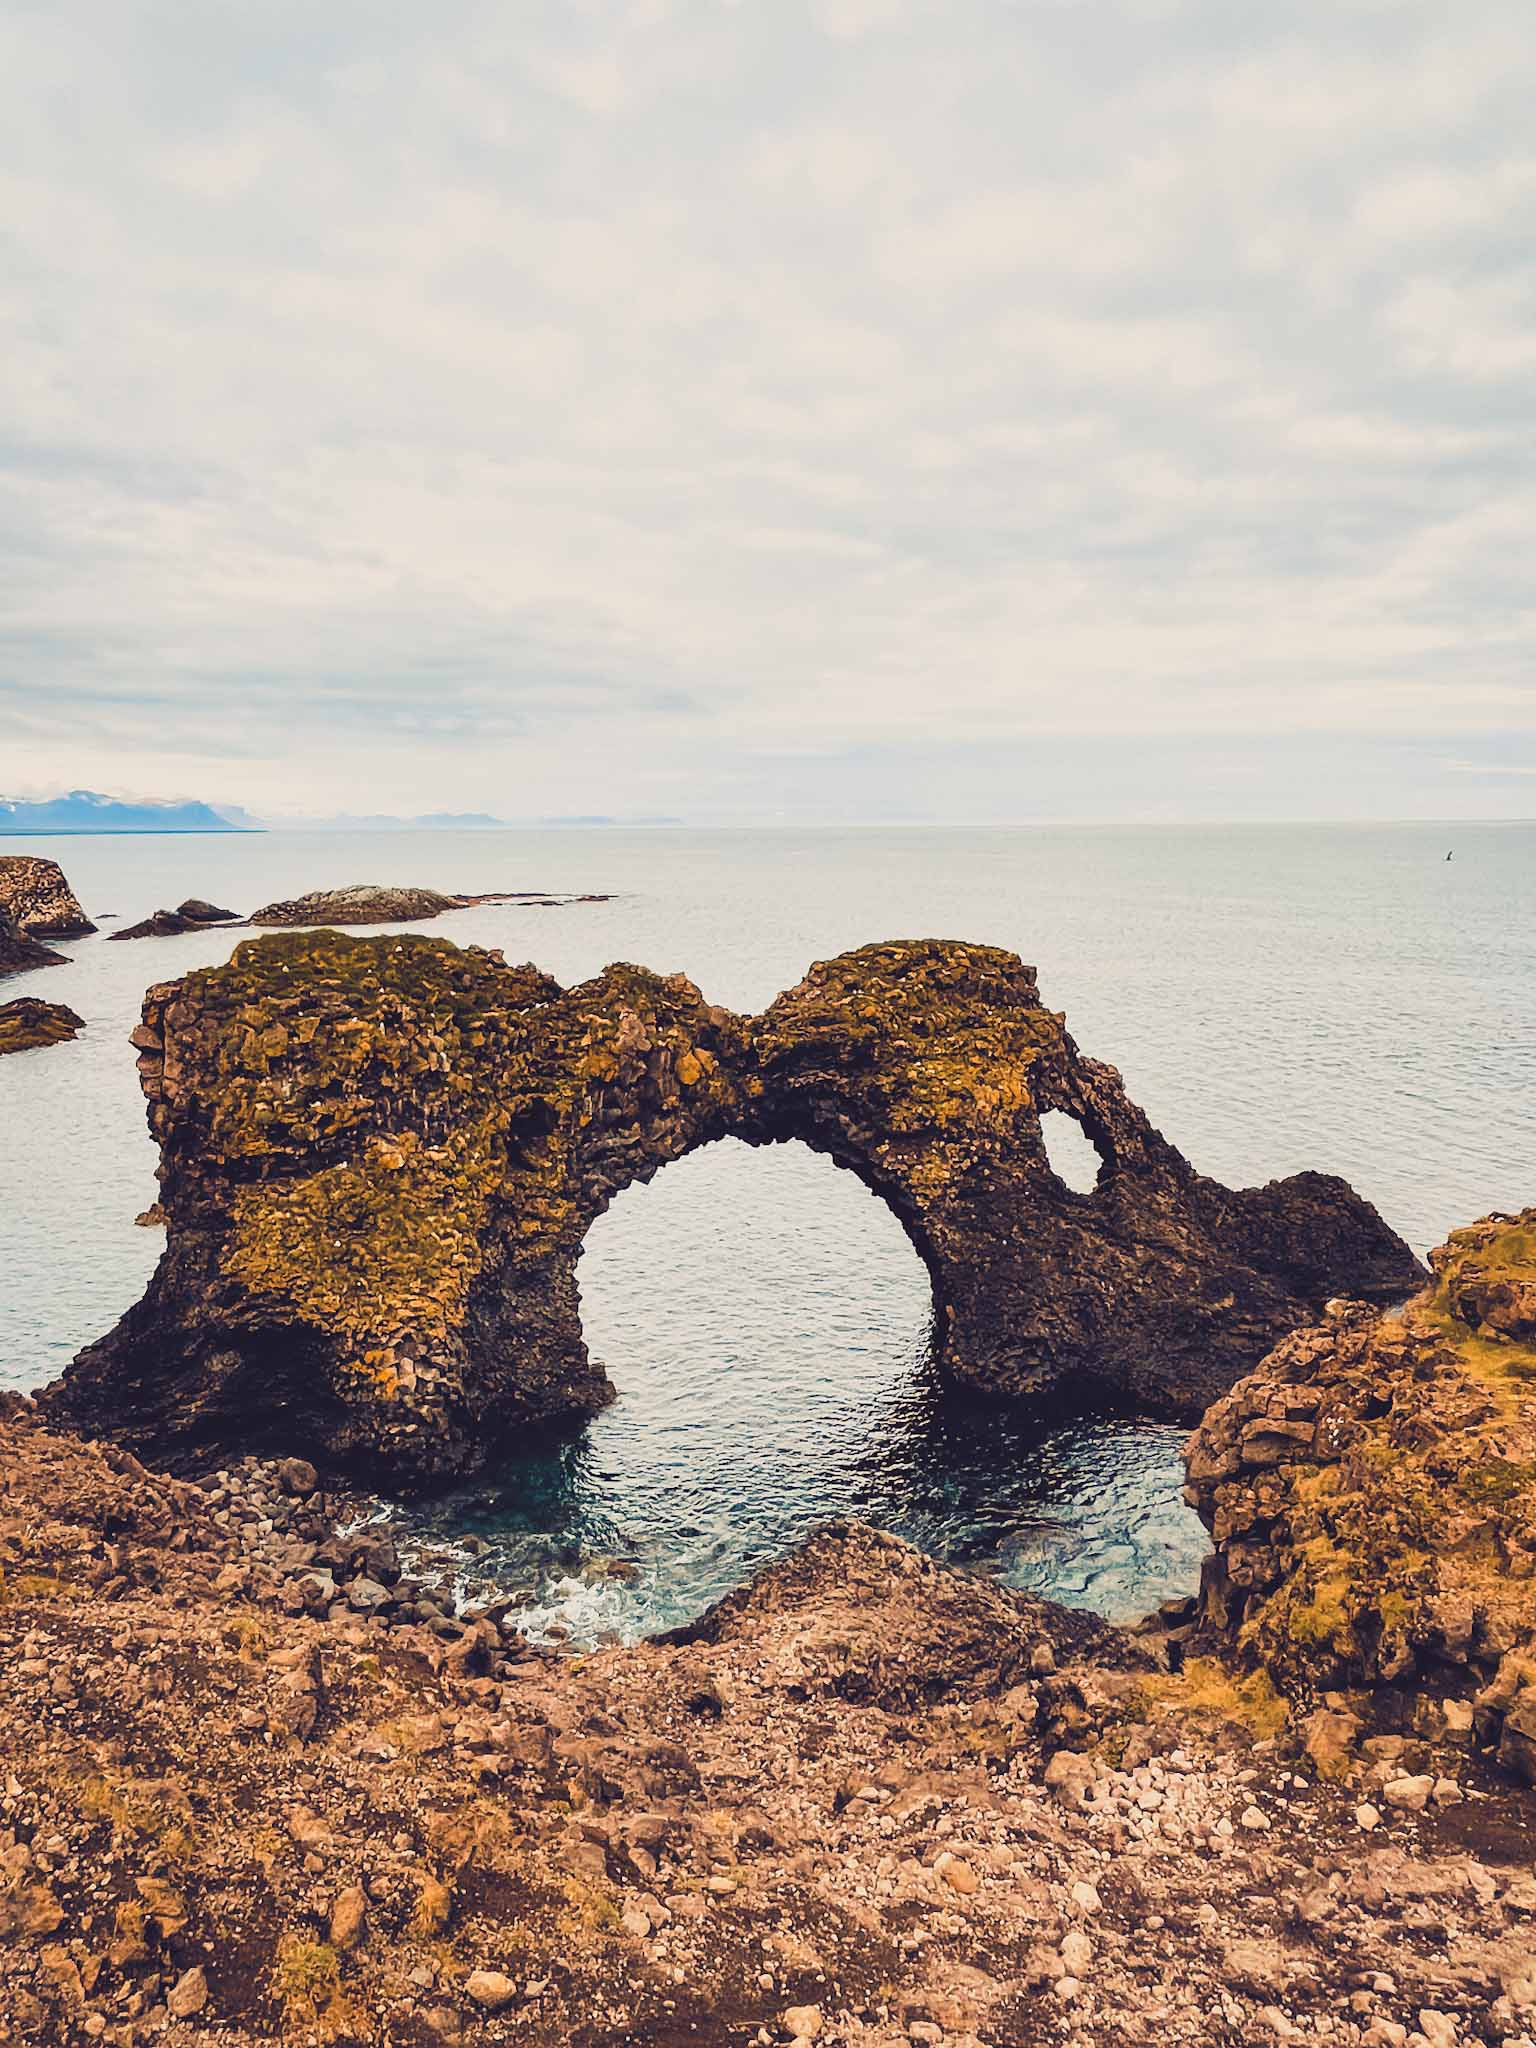 Natural stone arches in Iceland - Gatklettur - the Arch Rock at Arnarstapi